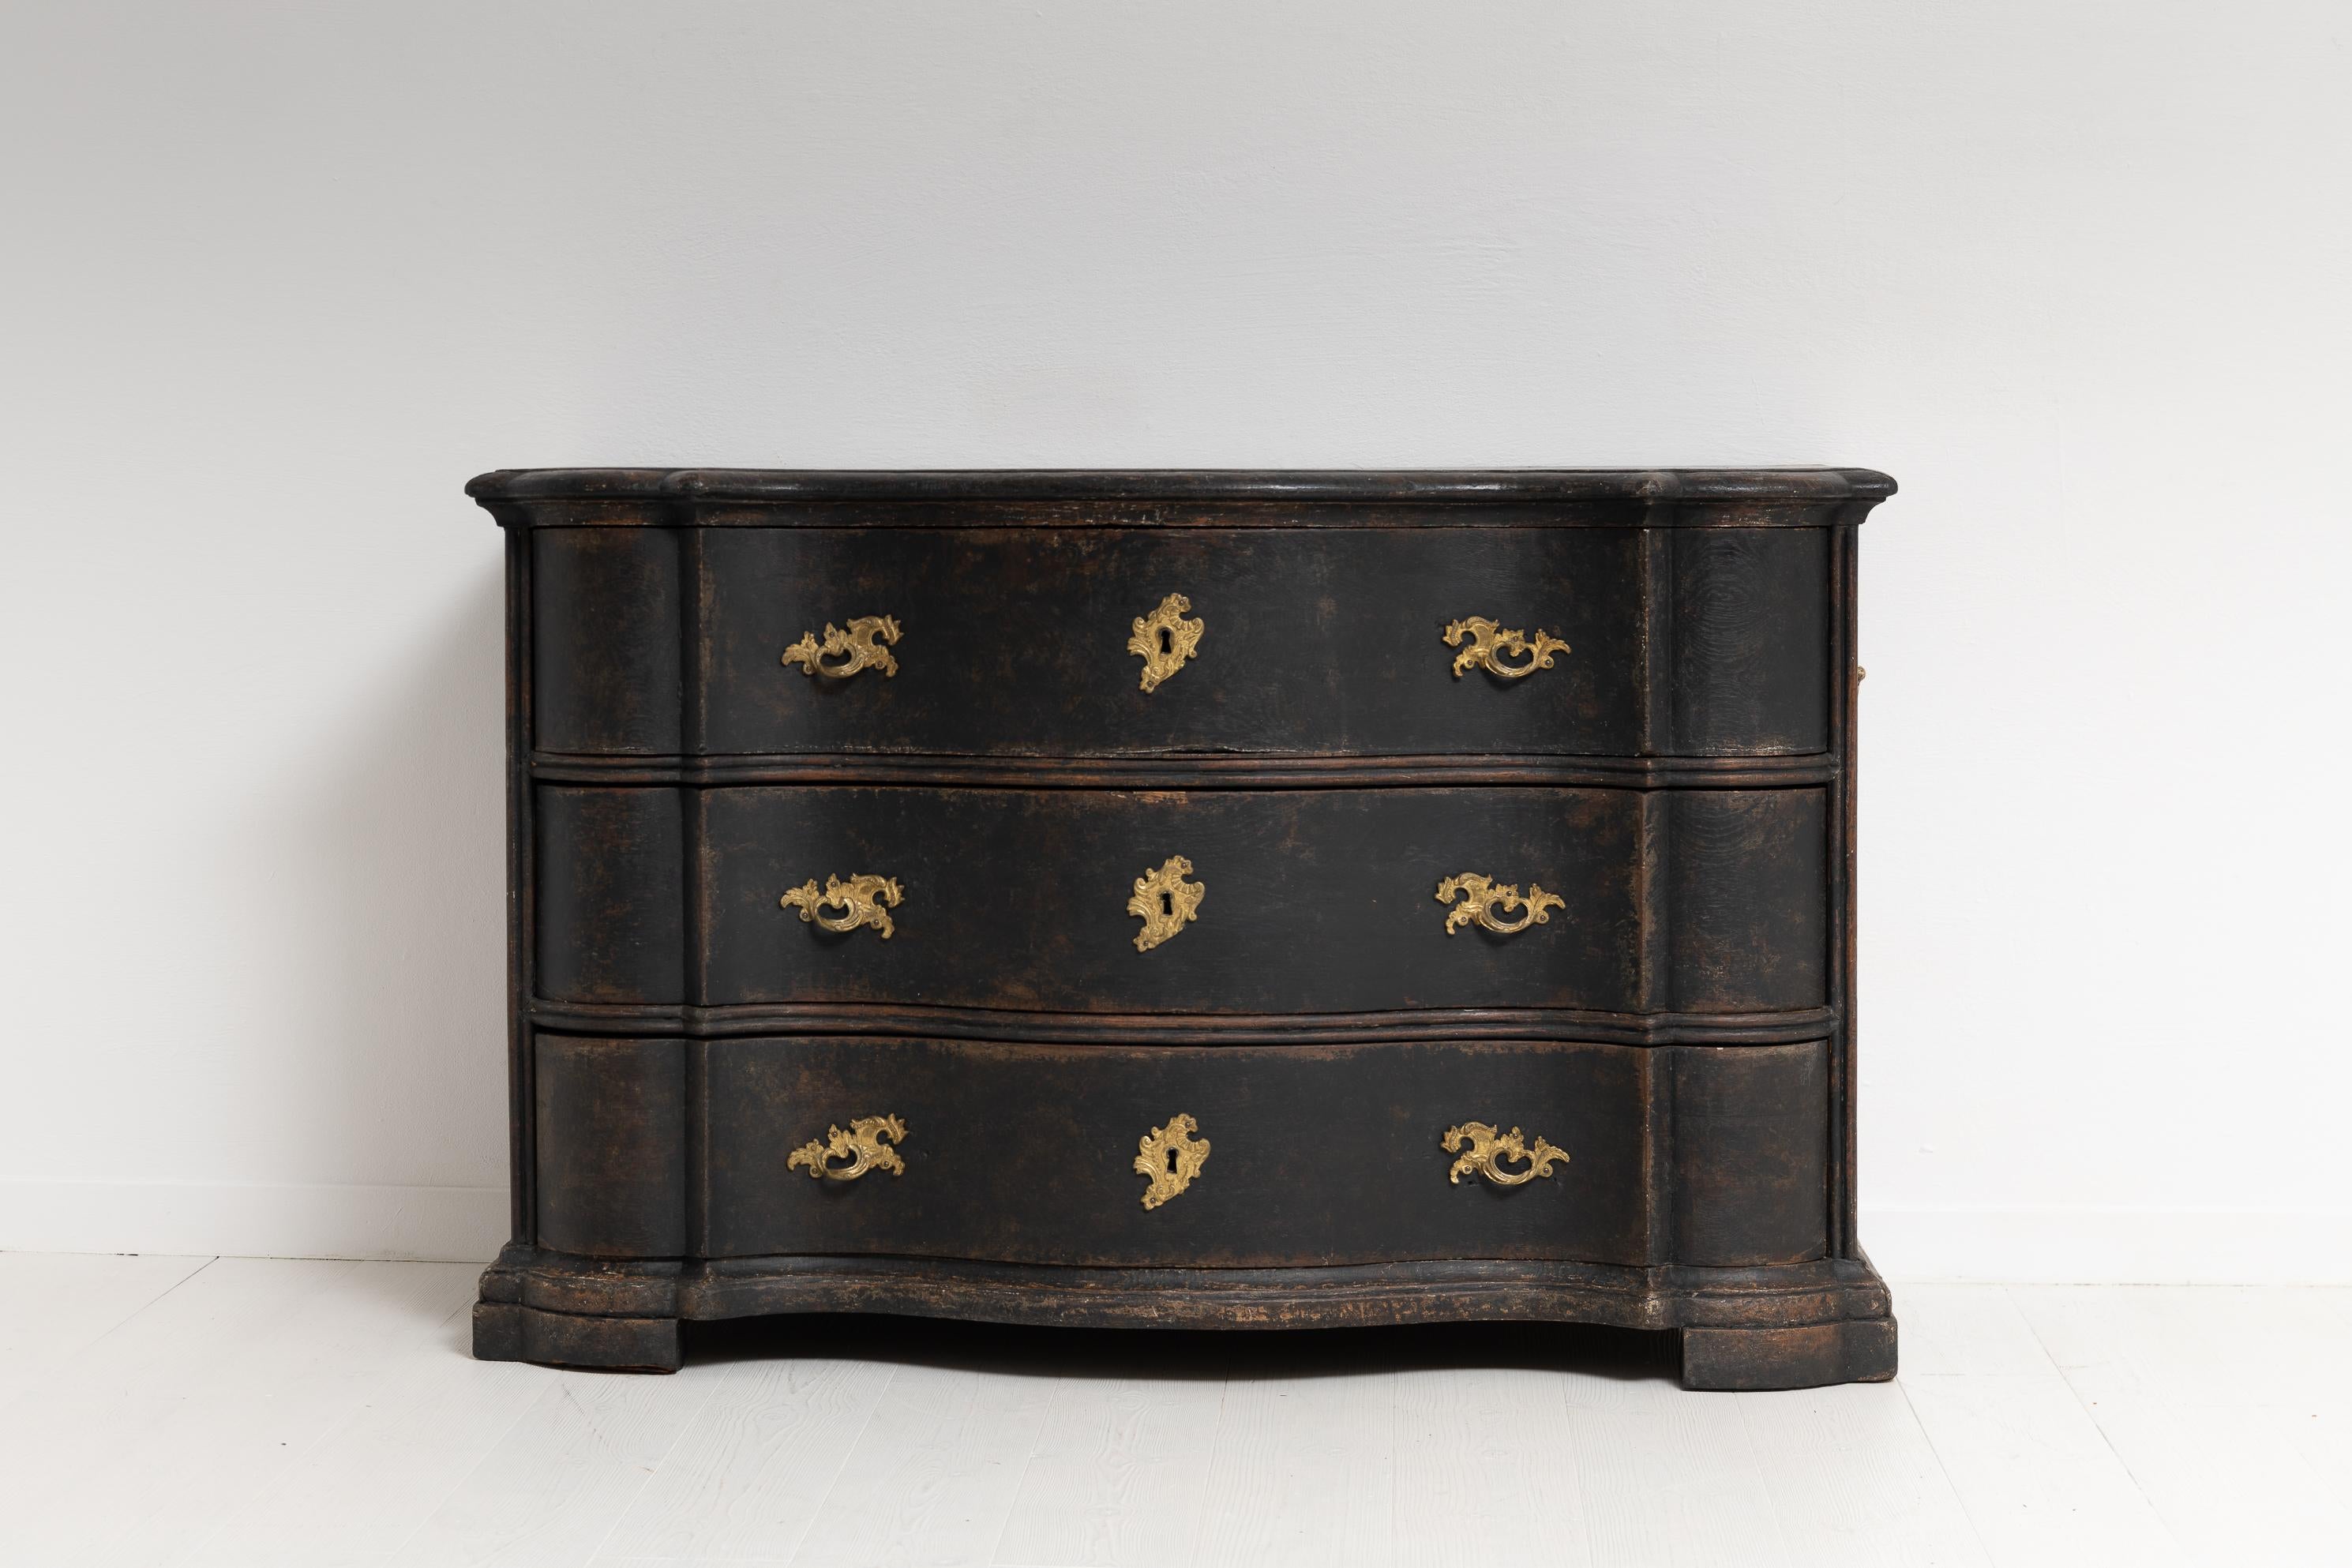 Black Swedish chest of drawers from the late baroque period. The chest is subtle but impactful with the dark paint, contrasting hardware and curved Baroque shape. It has three large curved drawers that all have the original locks. The key is